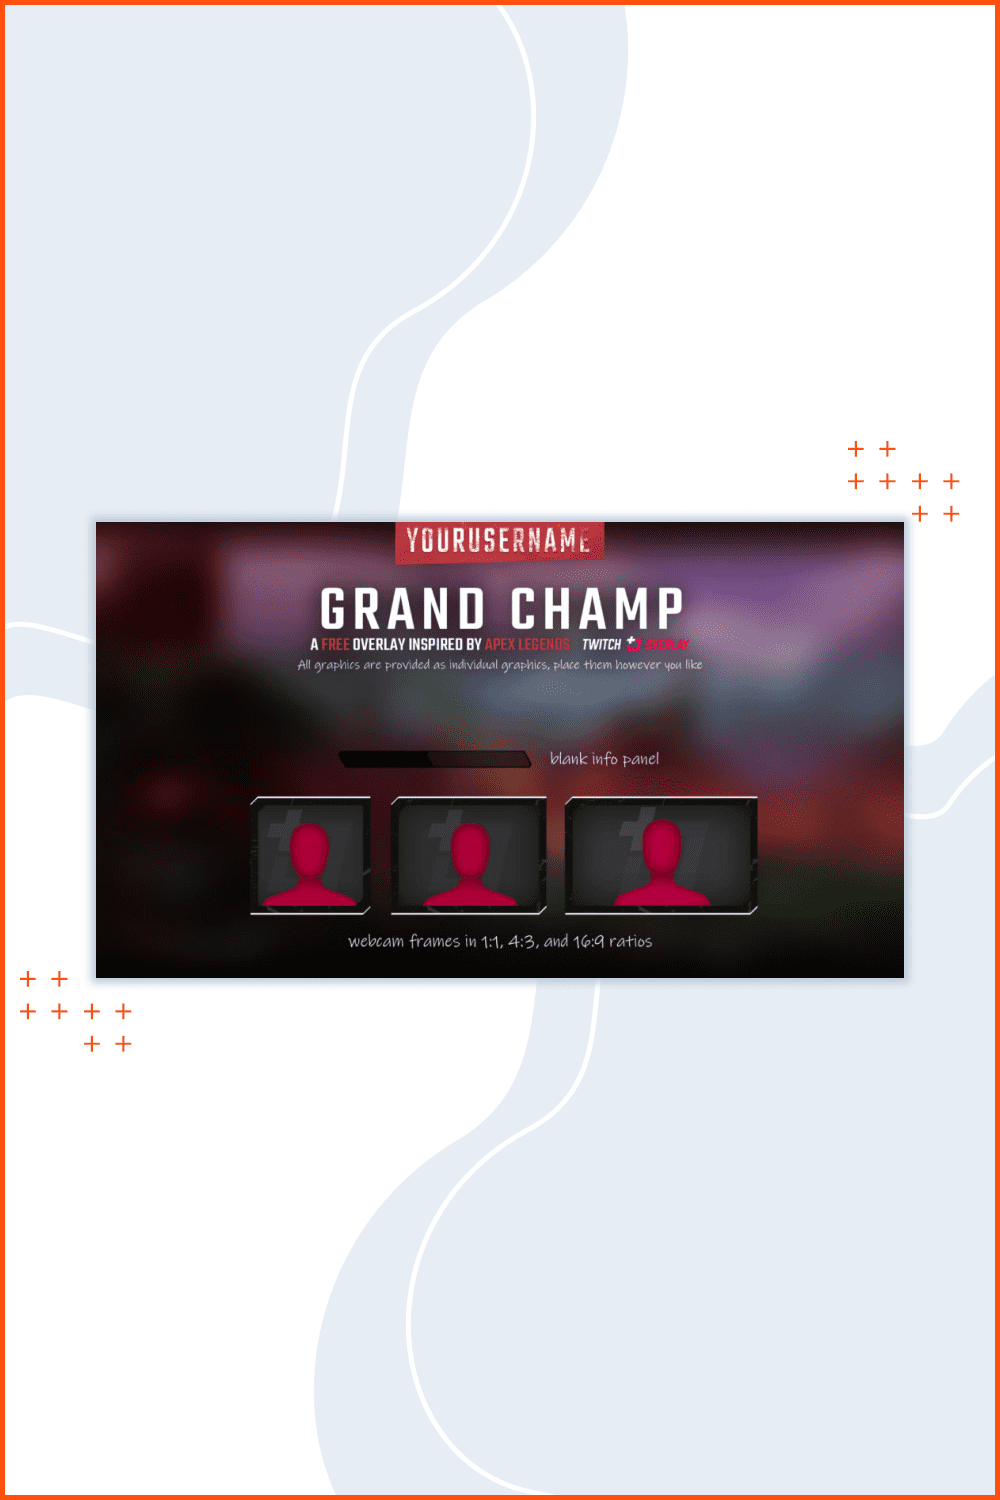 Grand Champ is overlay inspired by the art style, using pops of color amongst raw, industrial elements – it’s both rough and vibrant in the right places.